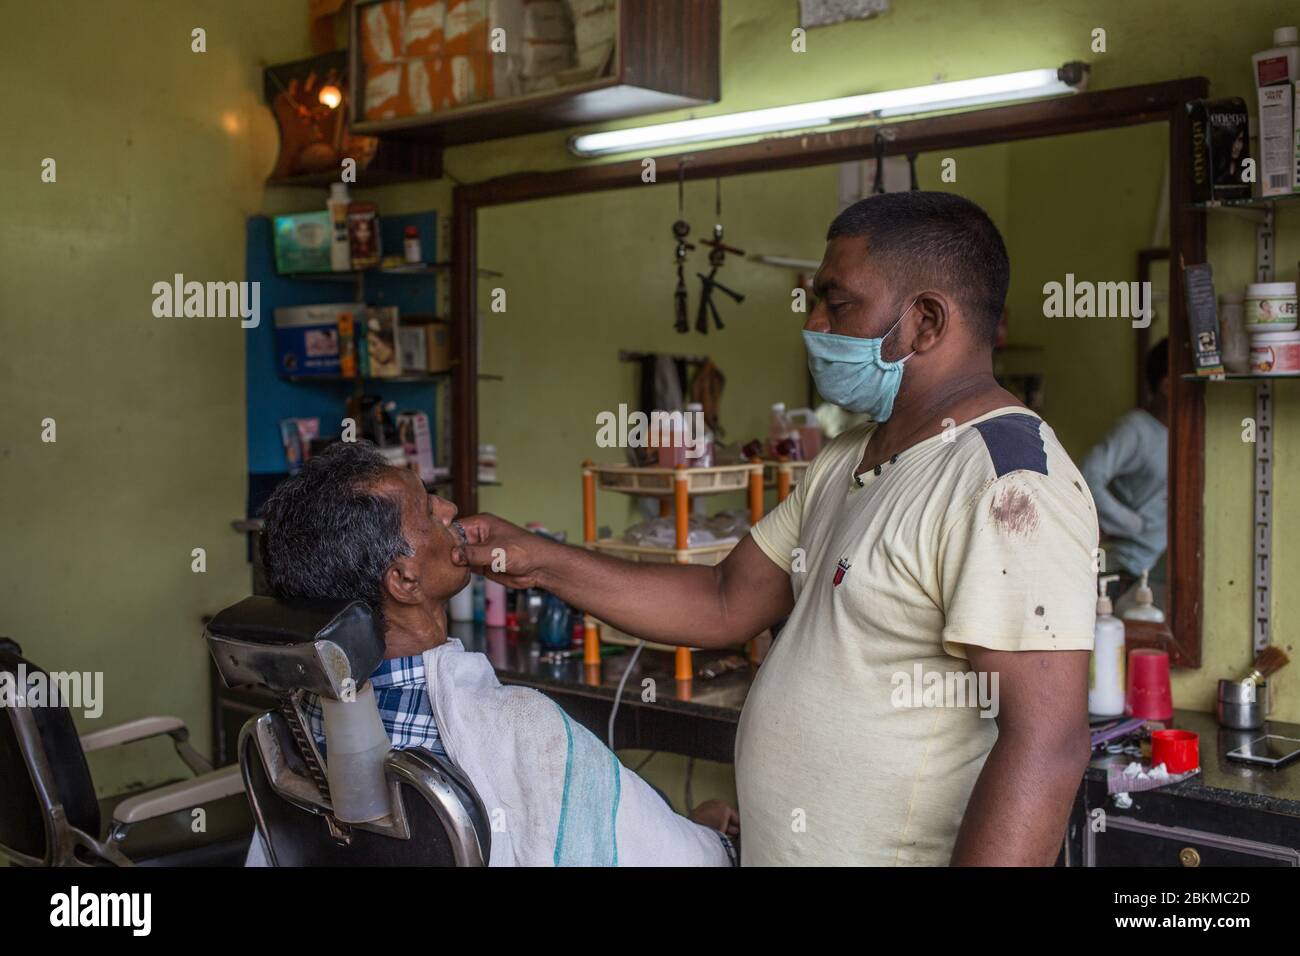 A man getting a shave during the covid-19 lockdown in India Stock Photo